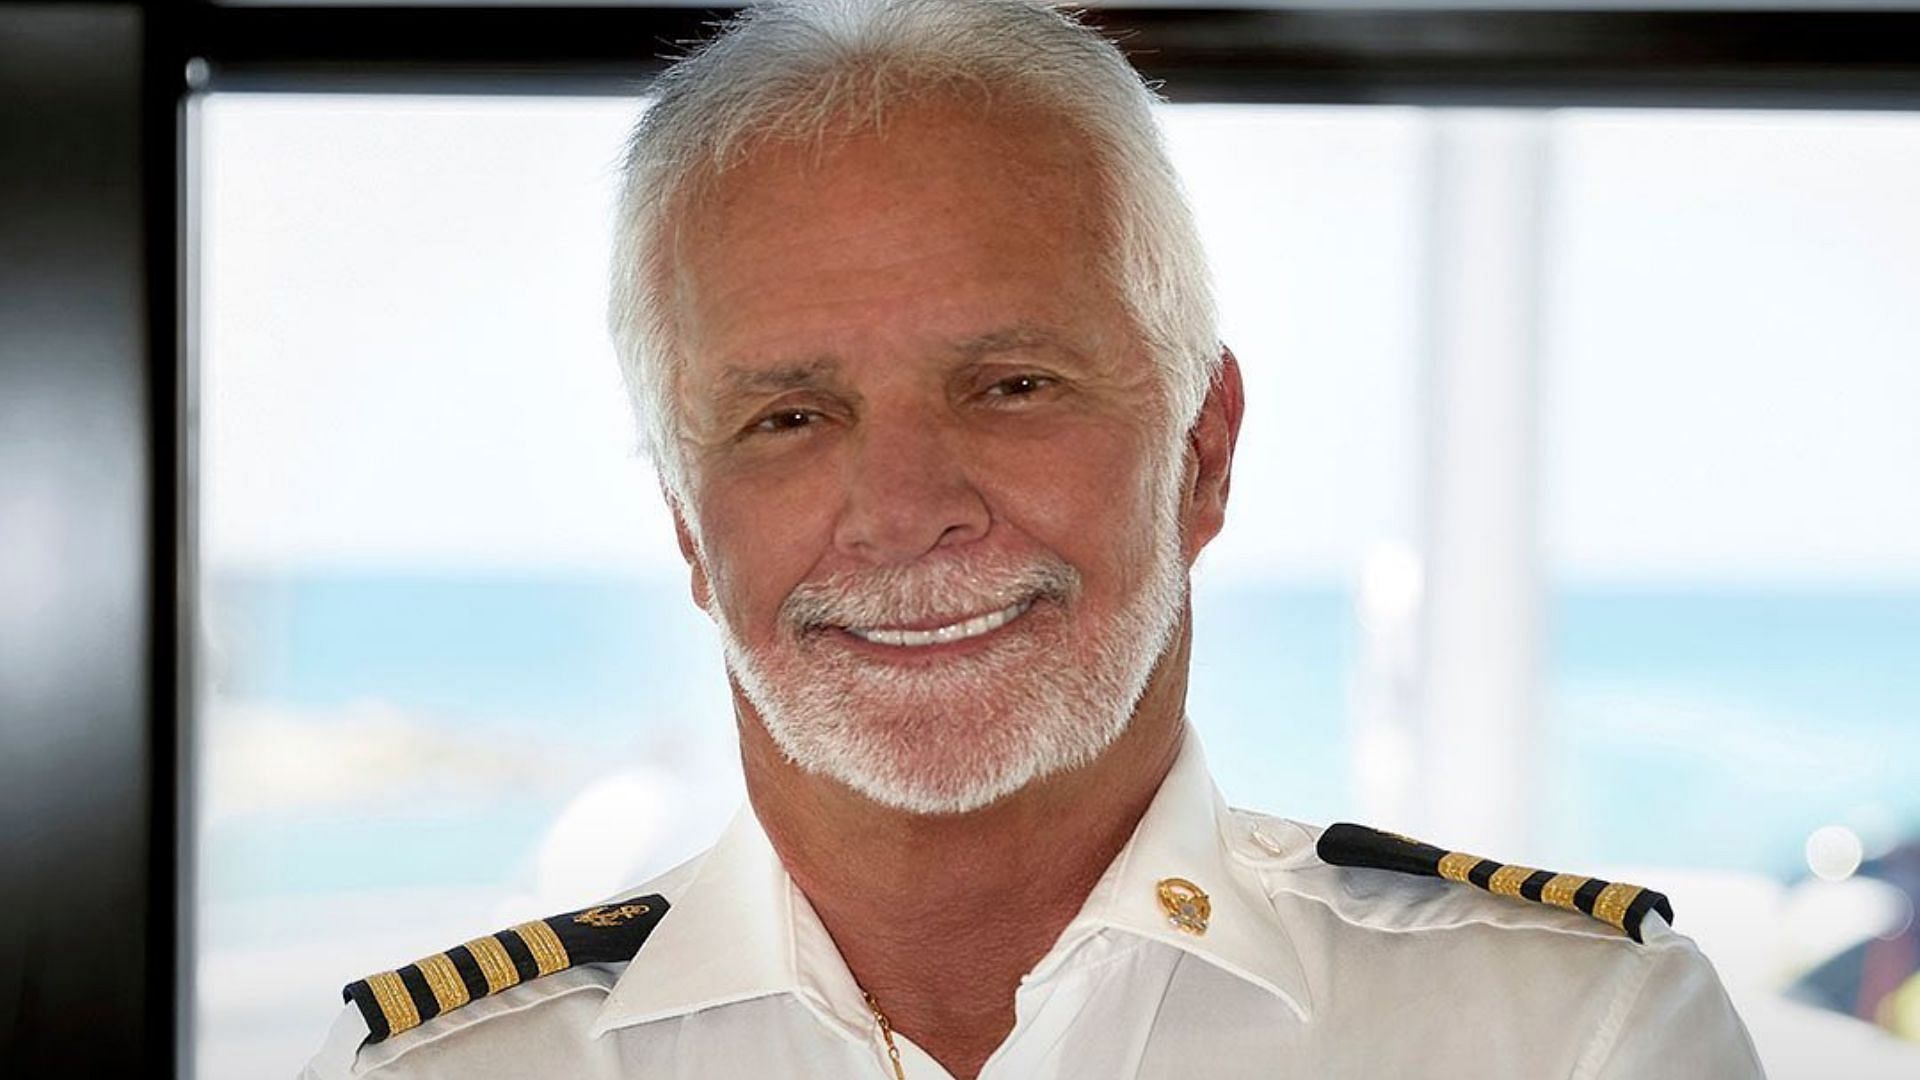 Later in the season, Captain Lee will return to ‘Below Deck’ to “Finish What I Started.”